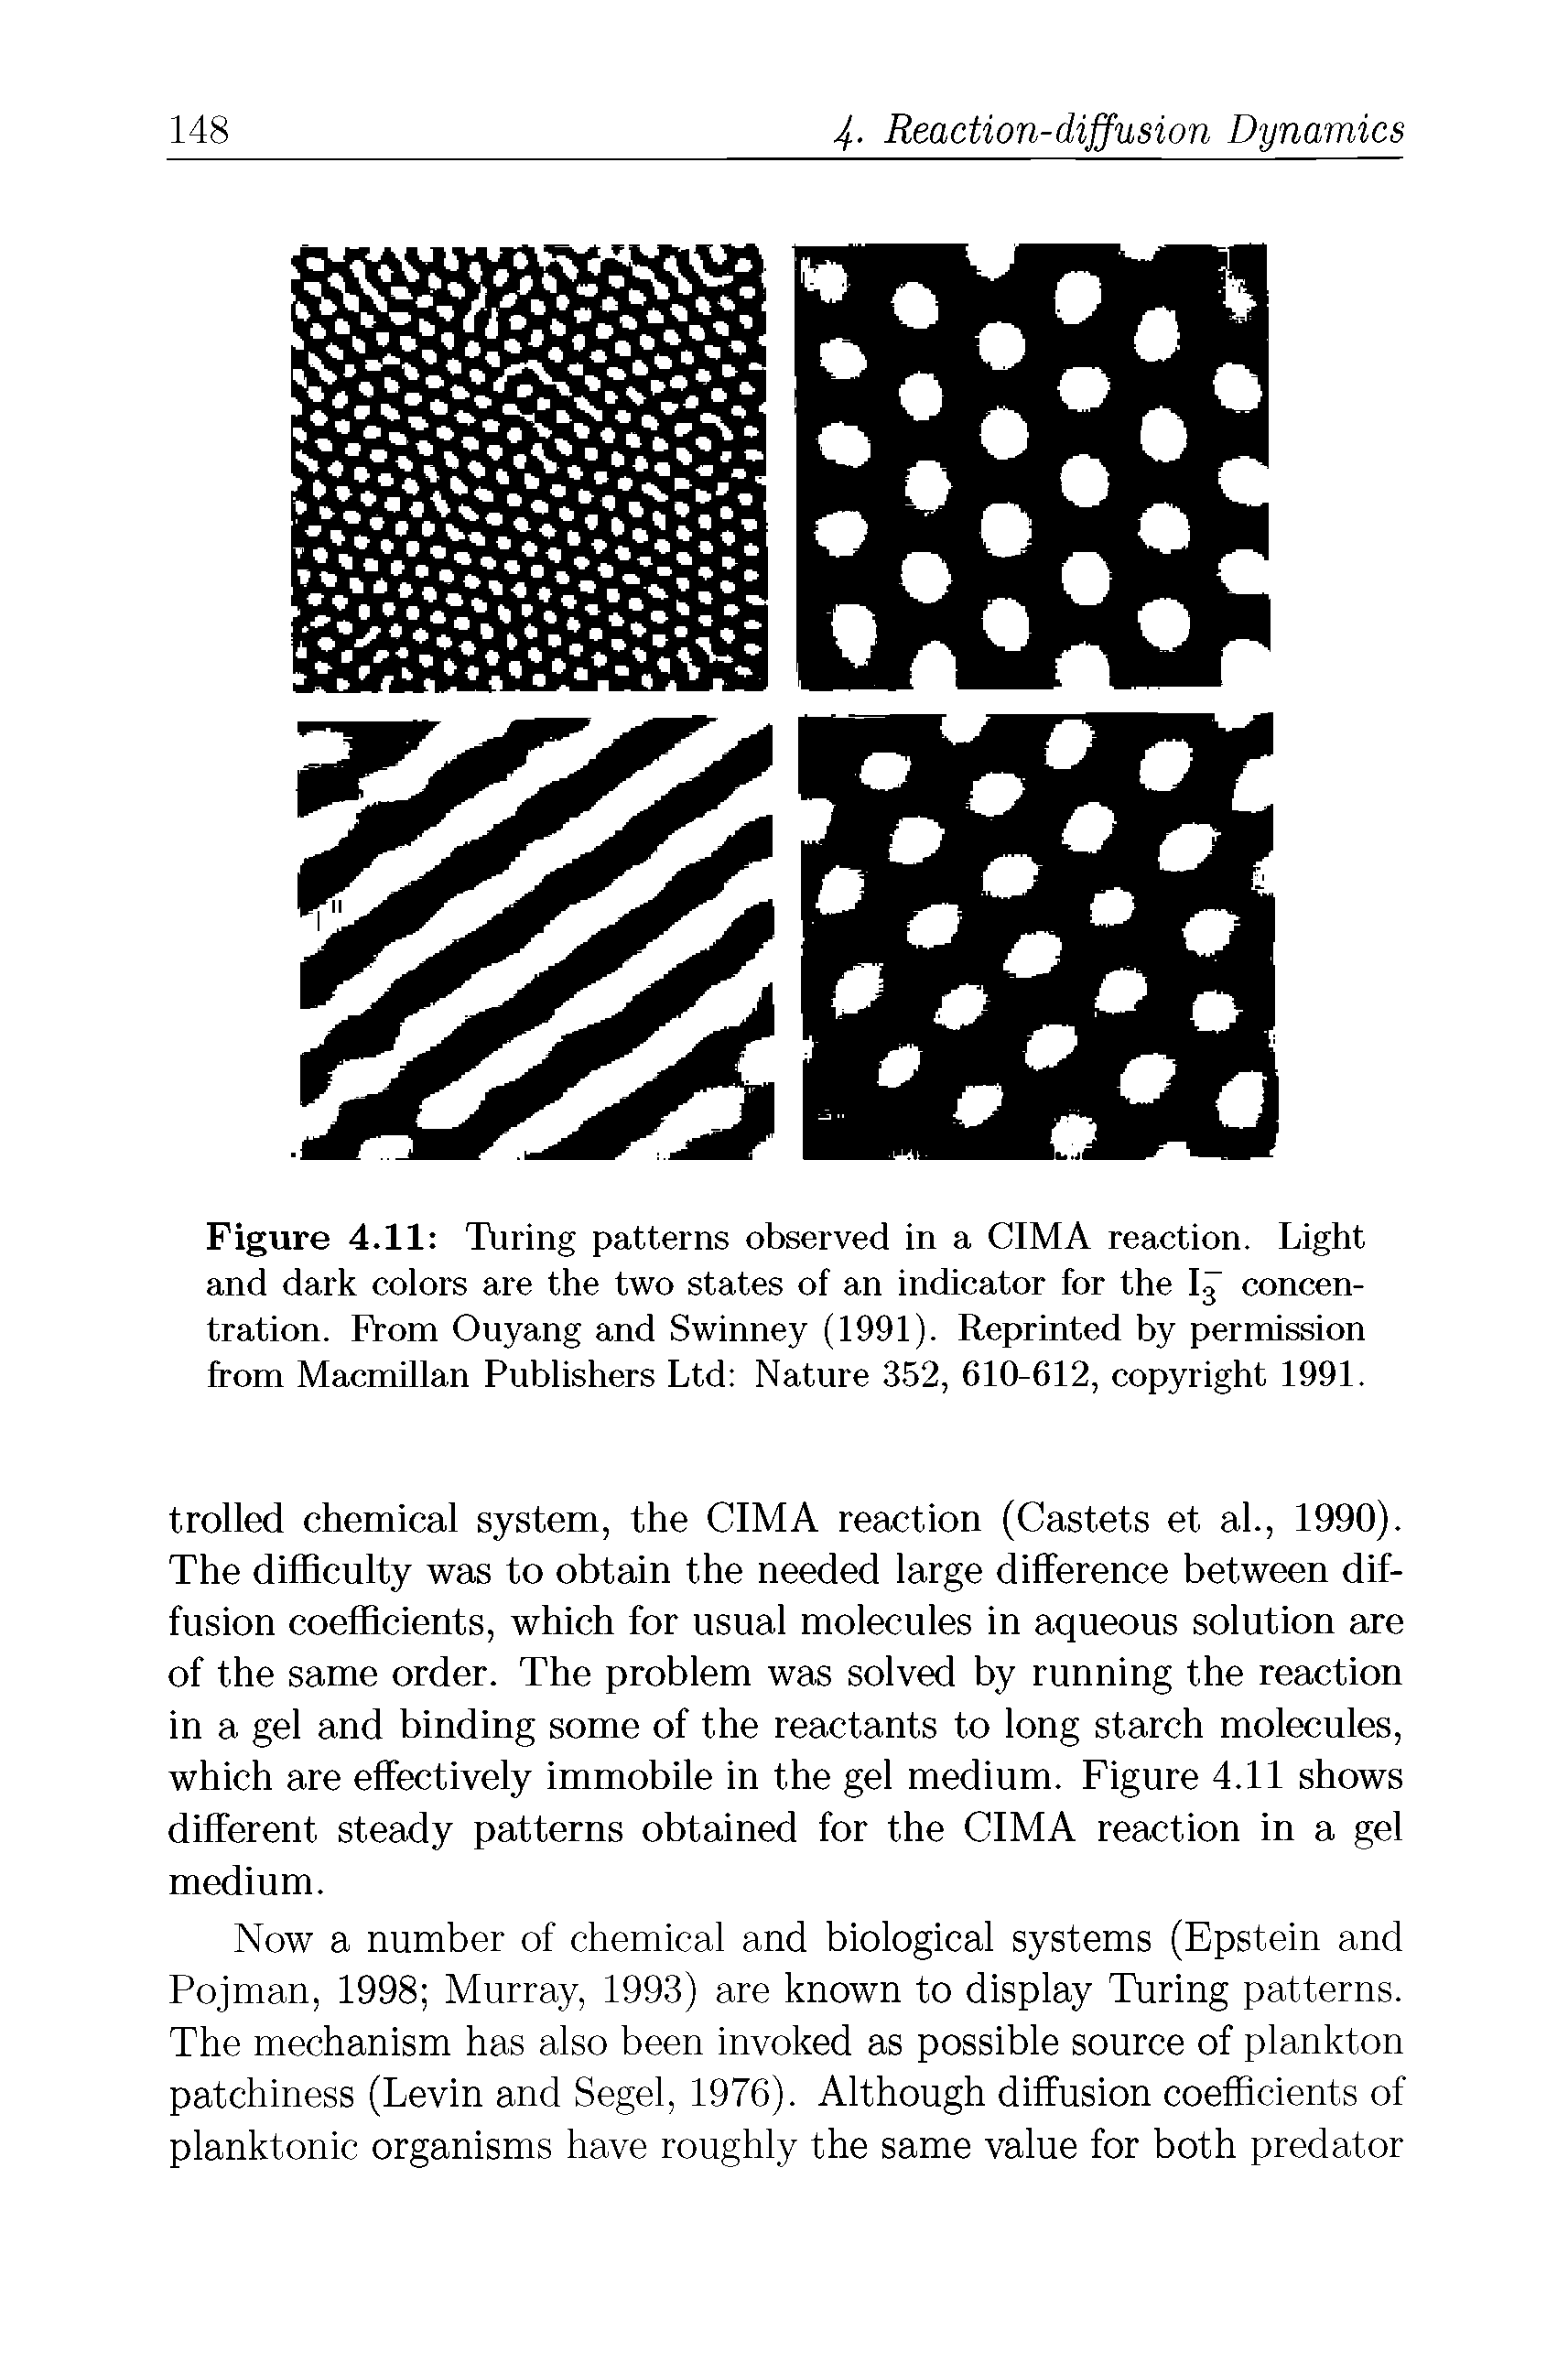 Figure 4.11 Turing patterns observed in a CIMA reaction. Light and dark colors are the two states of an indicator for the Ig concentration. From Ouyang and Swinney (1991). Reprinted by permission from Macmillan Publishers Ltd Nature 352, 610-612, copyright 1991.